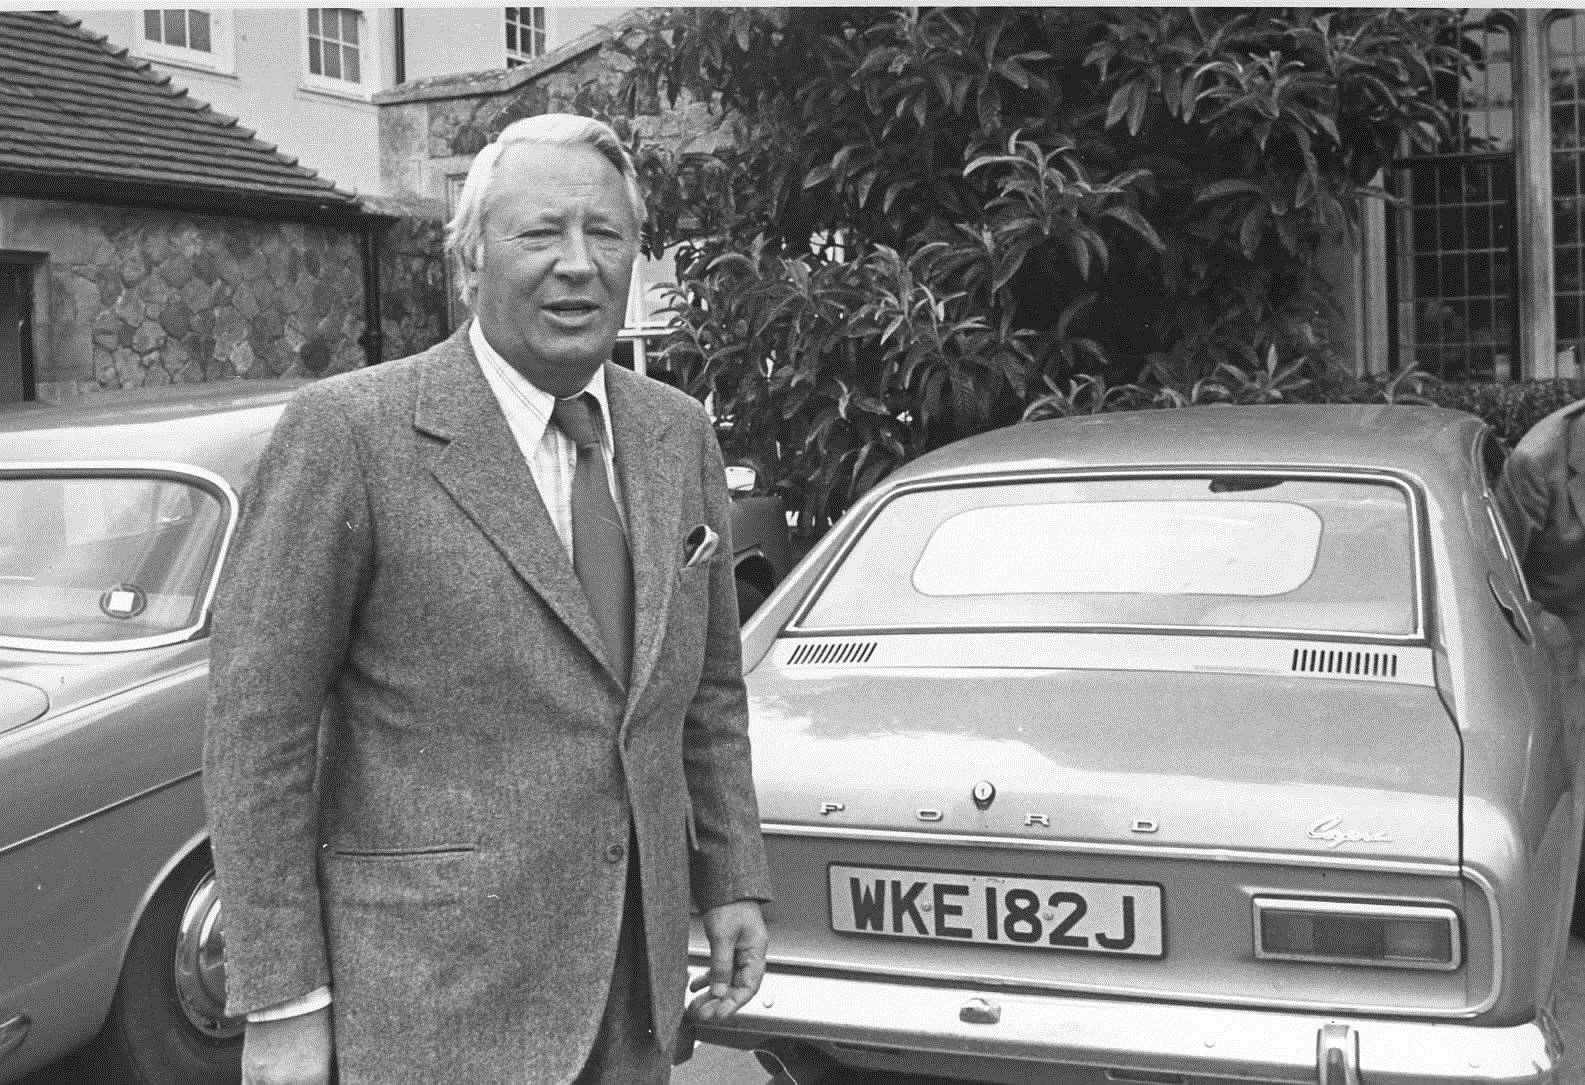 Ted Heath, Prime Minister from 1970 to 1974, grew up in Broadstairs and frequented the Tartar Frigate pub